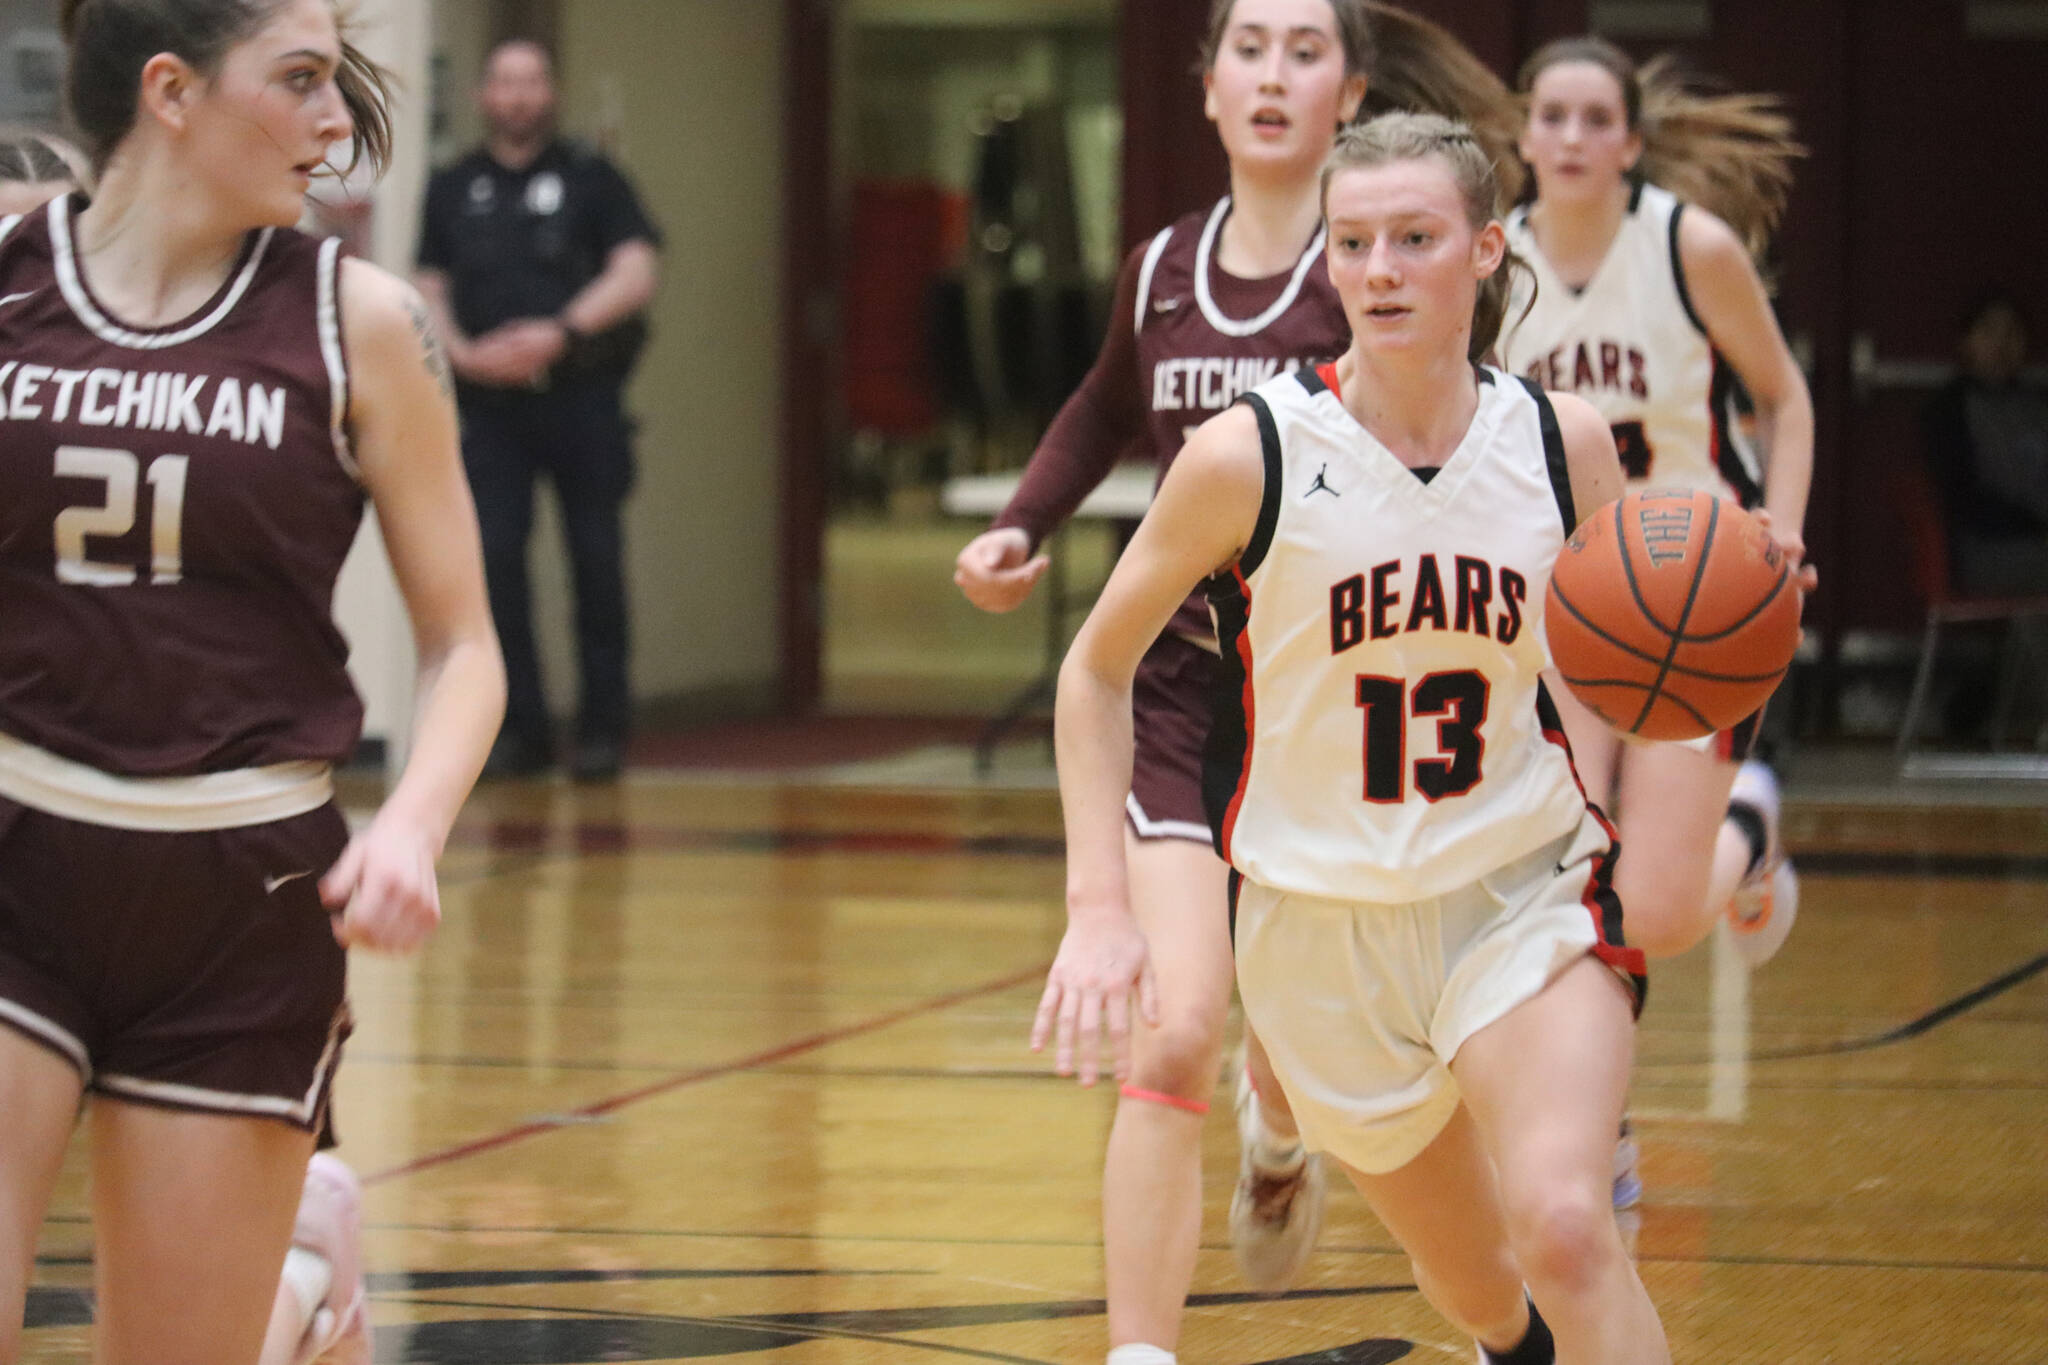 JDHS’ Skylar Tuckwood (13) sprints down the court against Ketchikan High School on Friday, Feb. 24 at JDHS where she led with a total of 19 points. Tuckwood earned first team all-state honors for her 22-23 senior season. (Jonson Kuhn / Juneau Empire File)